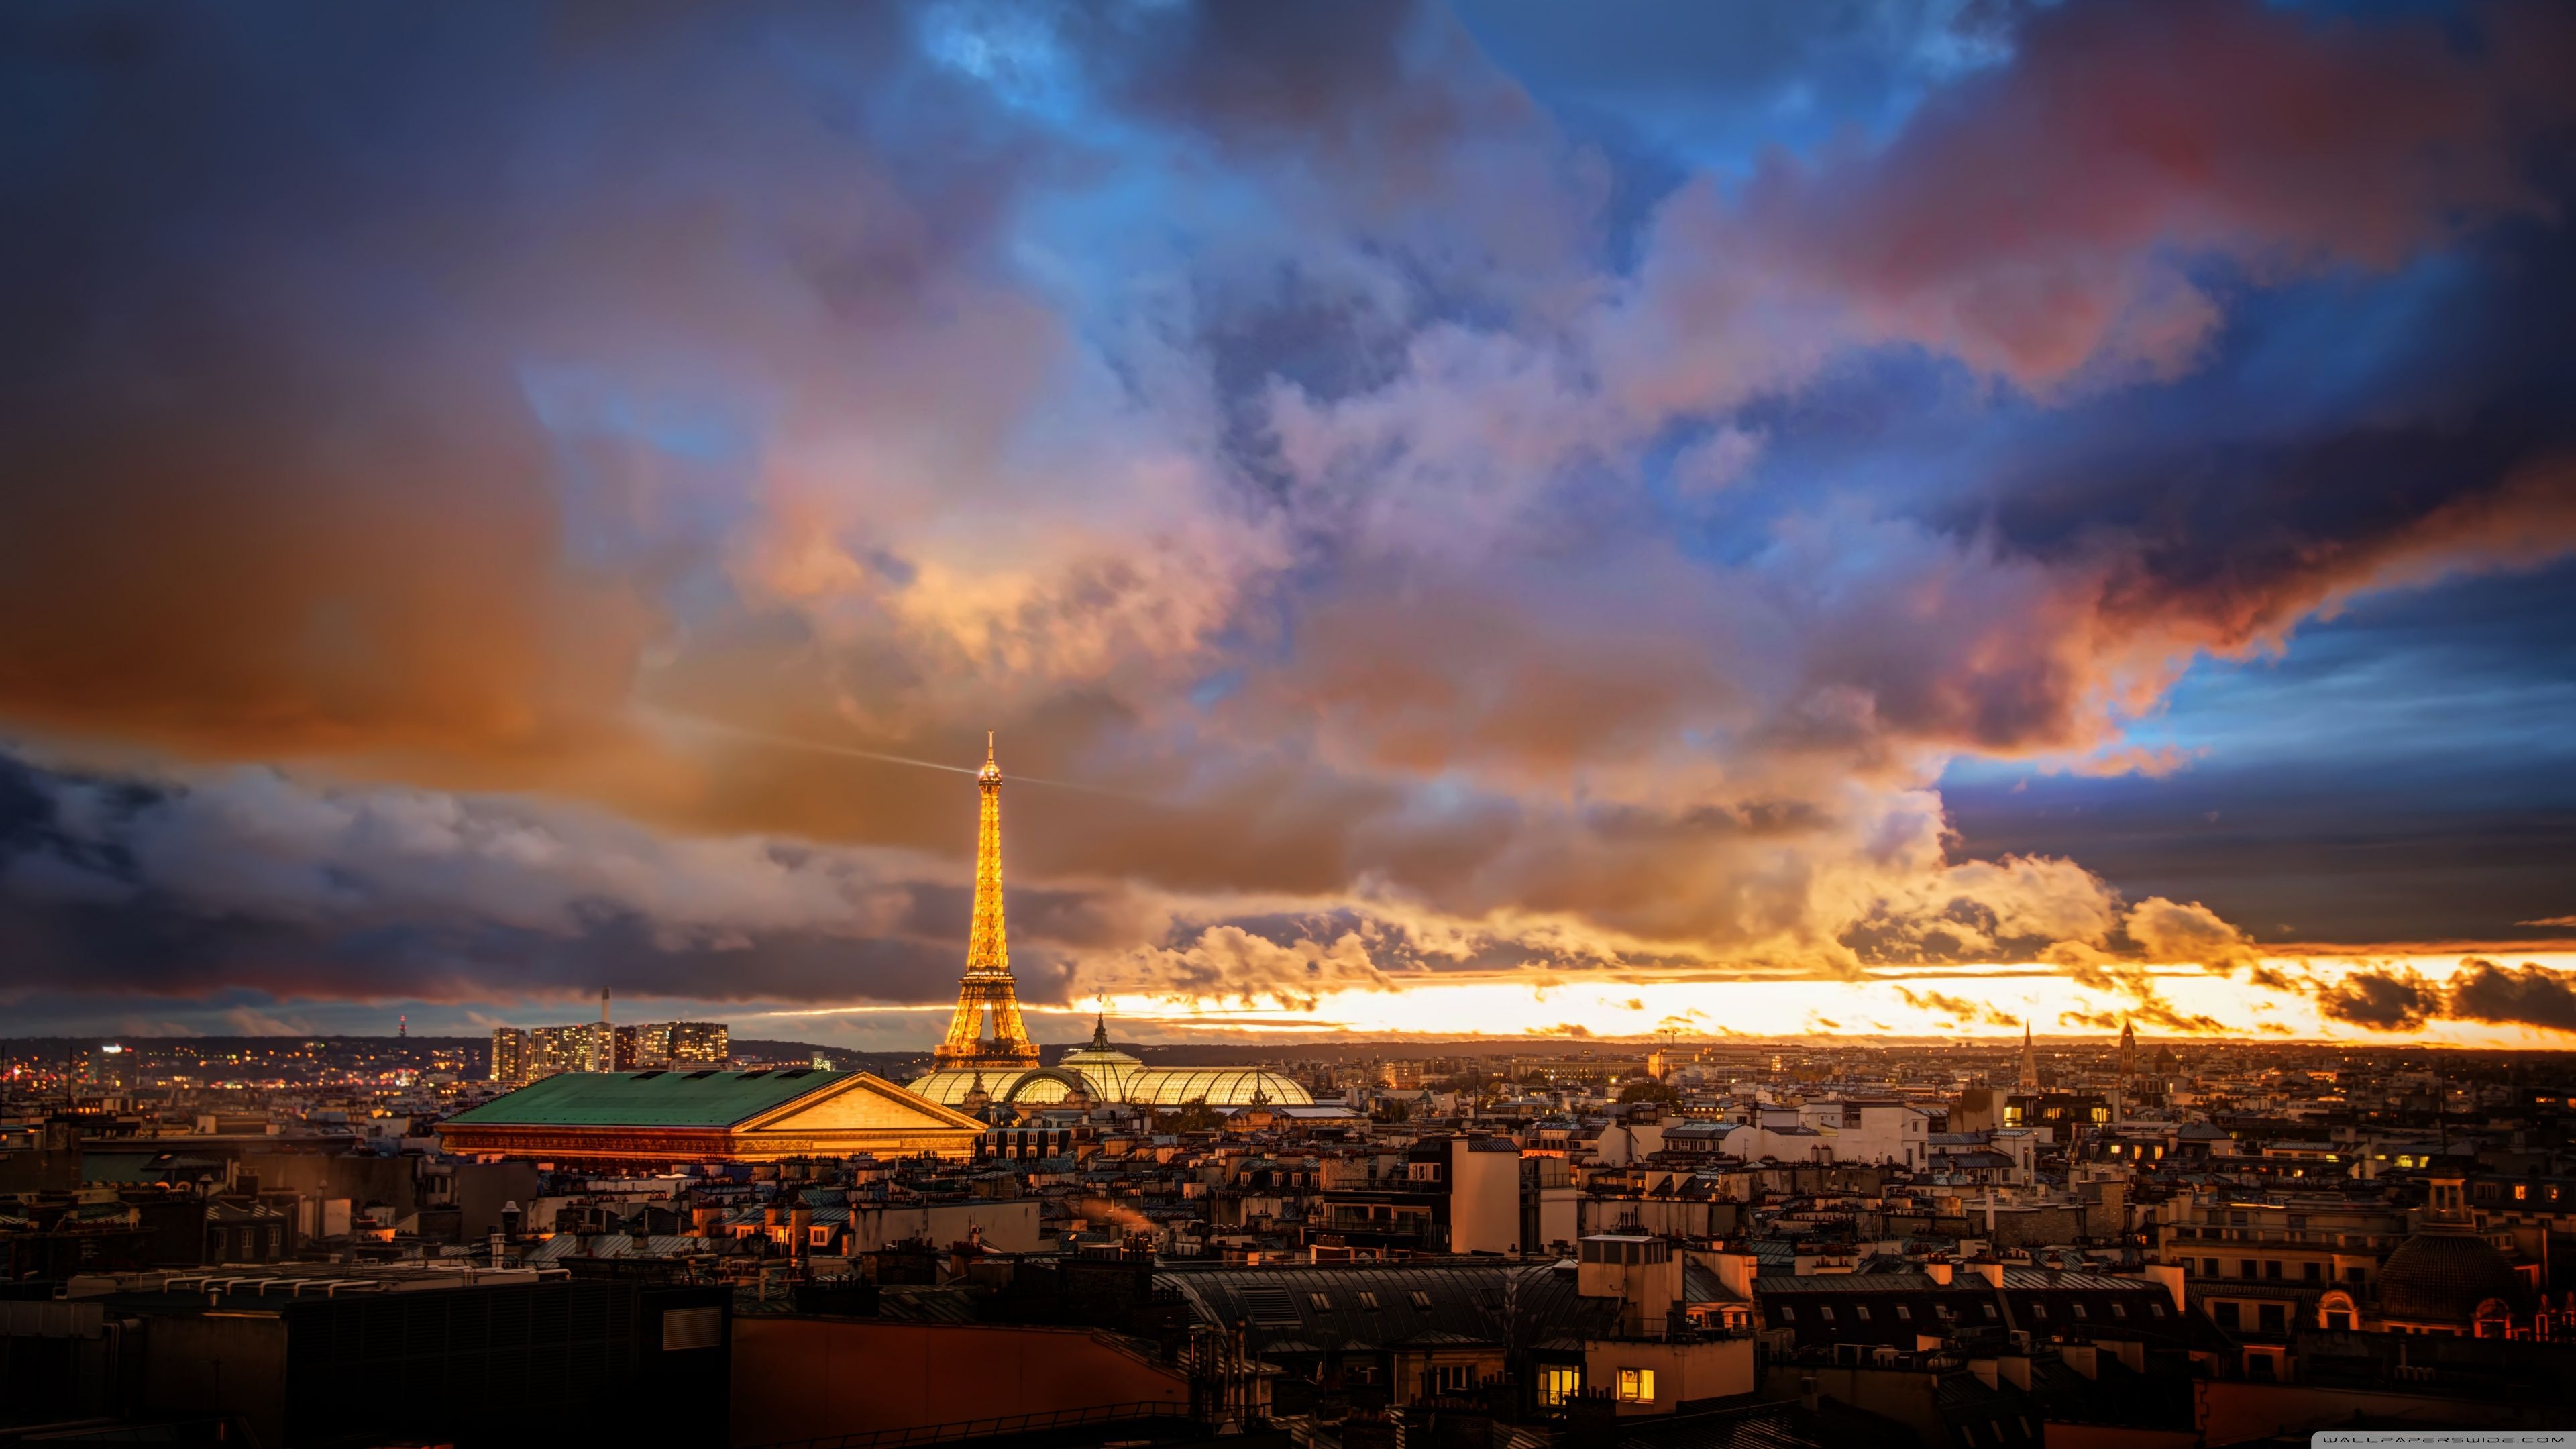 Paris 4K wallpaper for your desktop or mobile screen free and easy to download